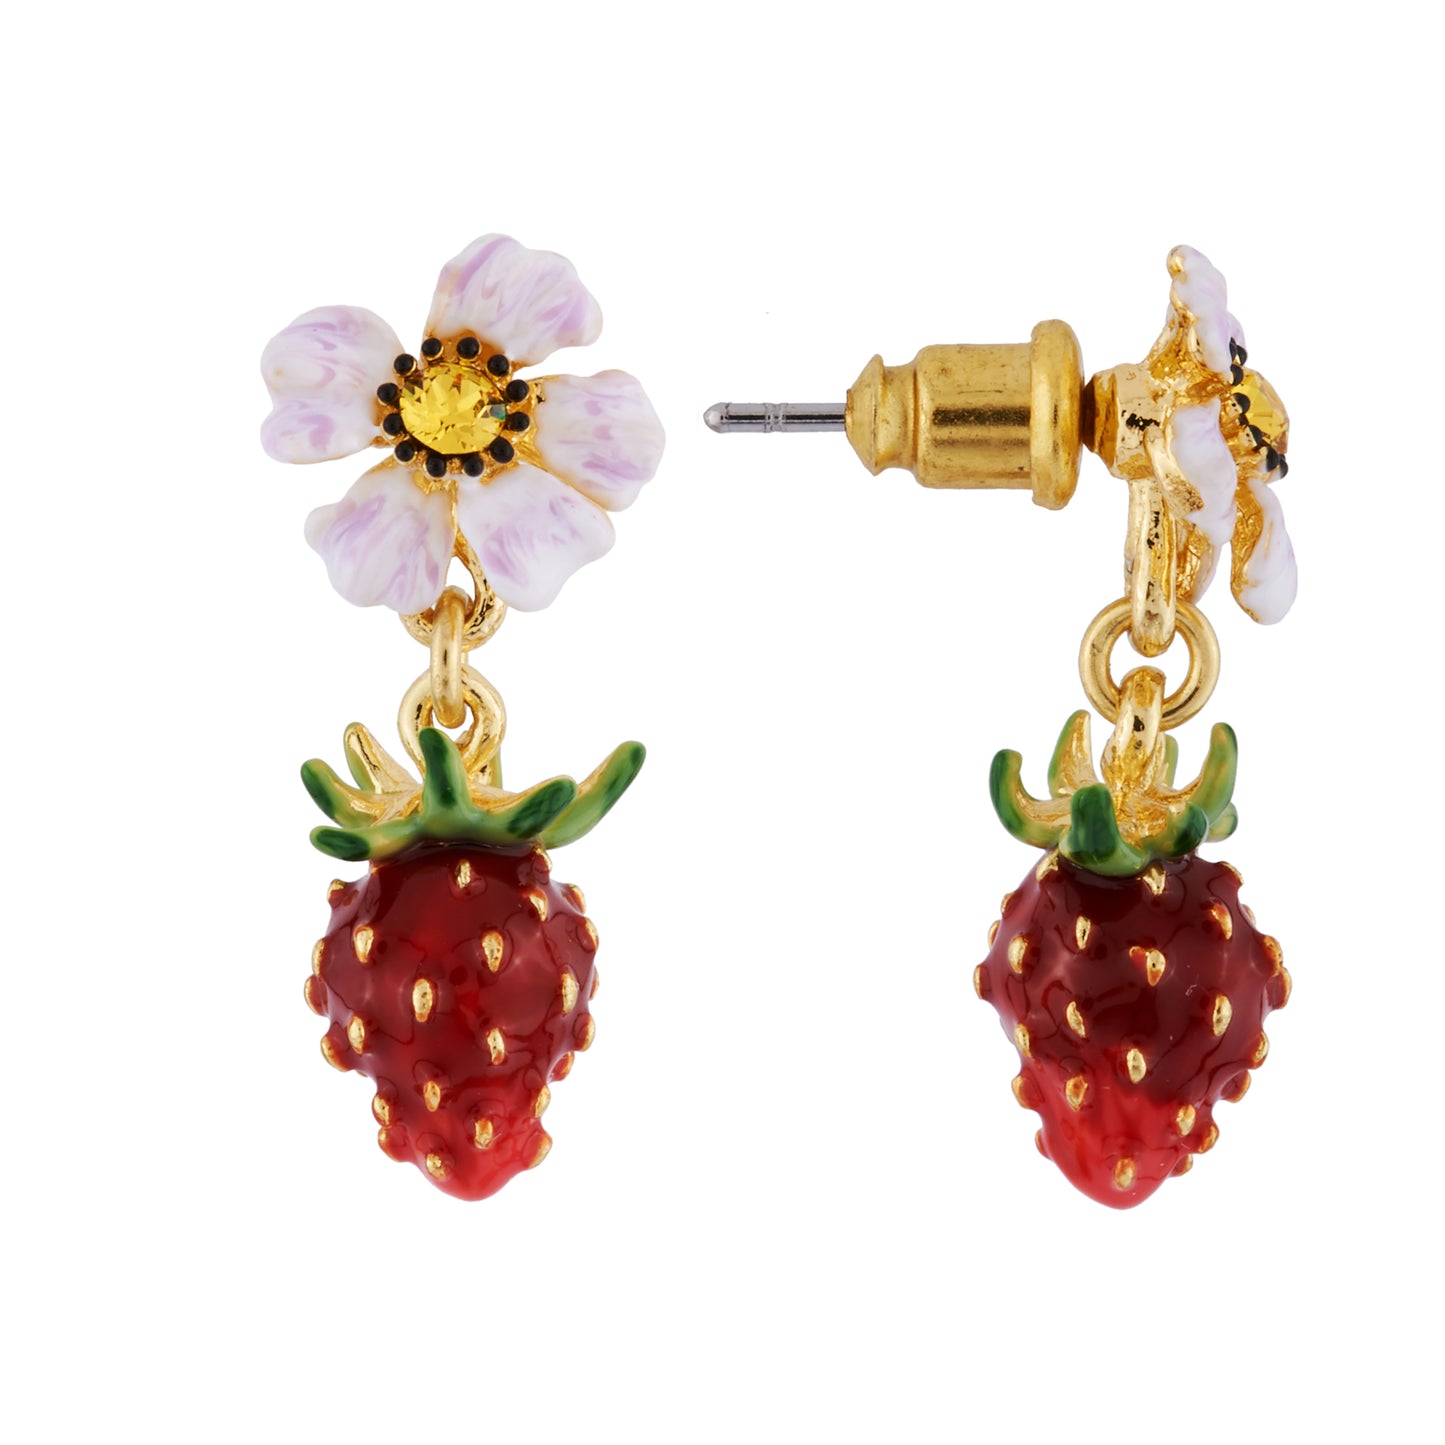 Small Strawberry And White Flower Earrings | AHPO1021